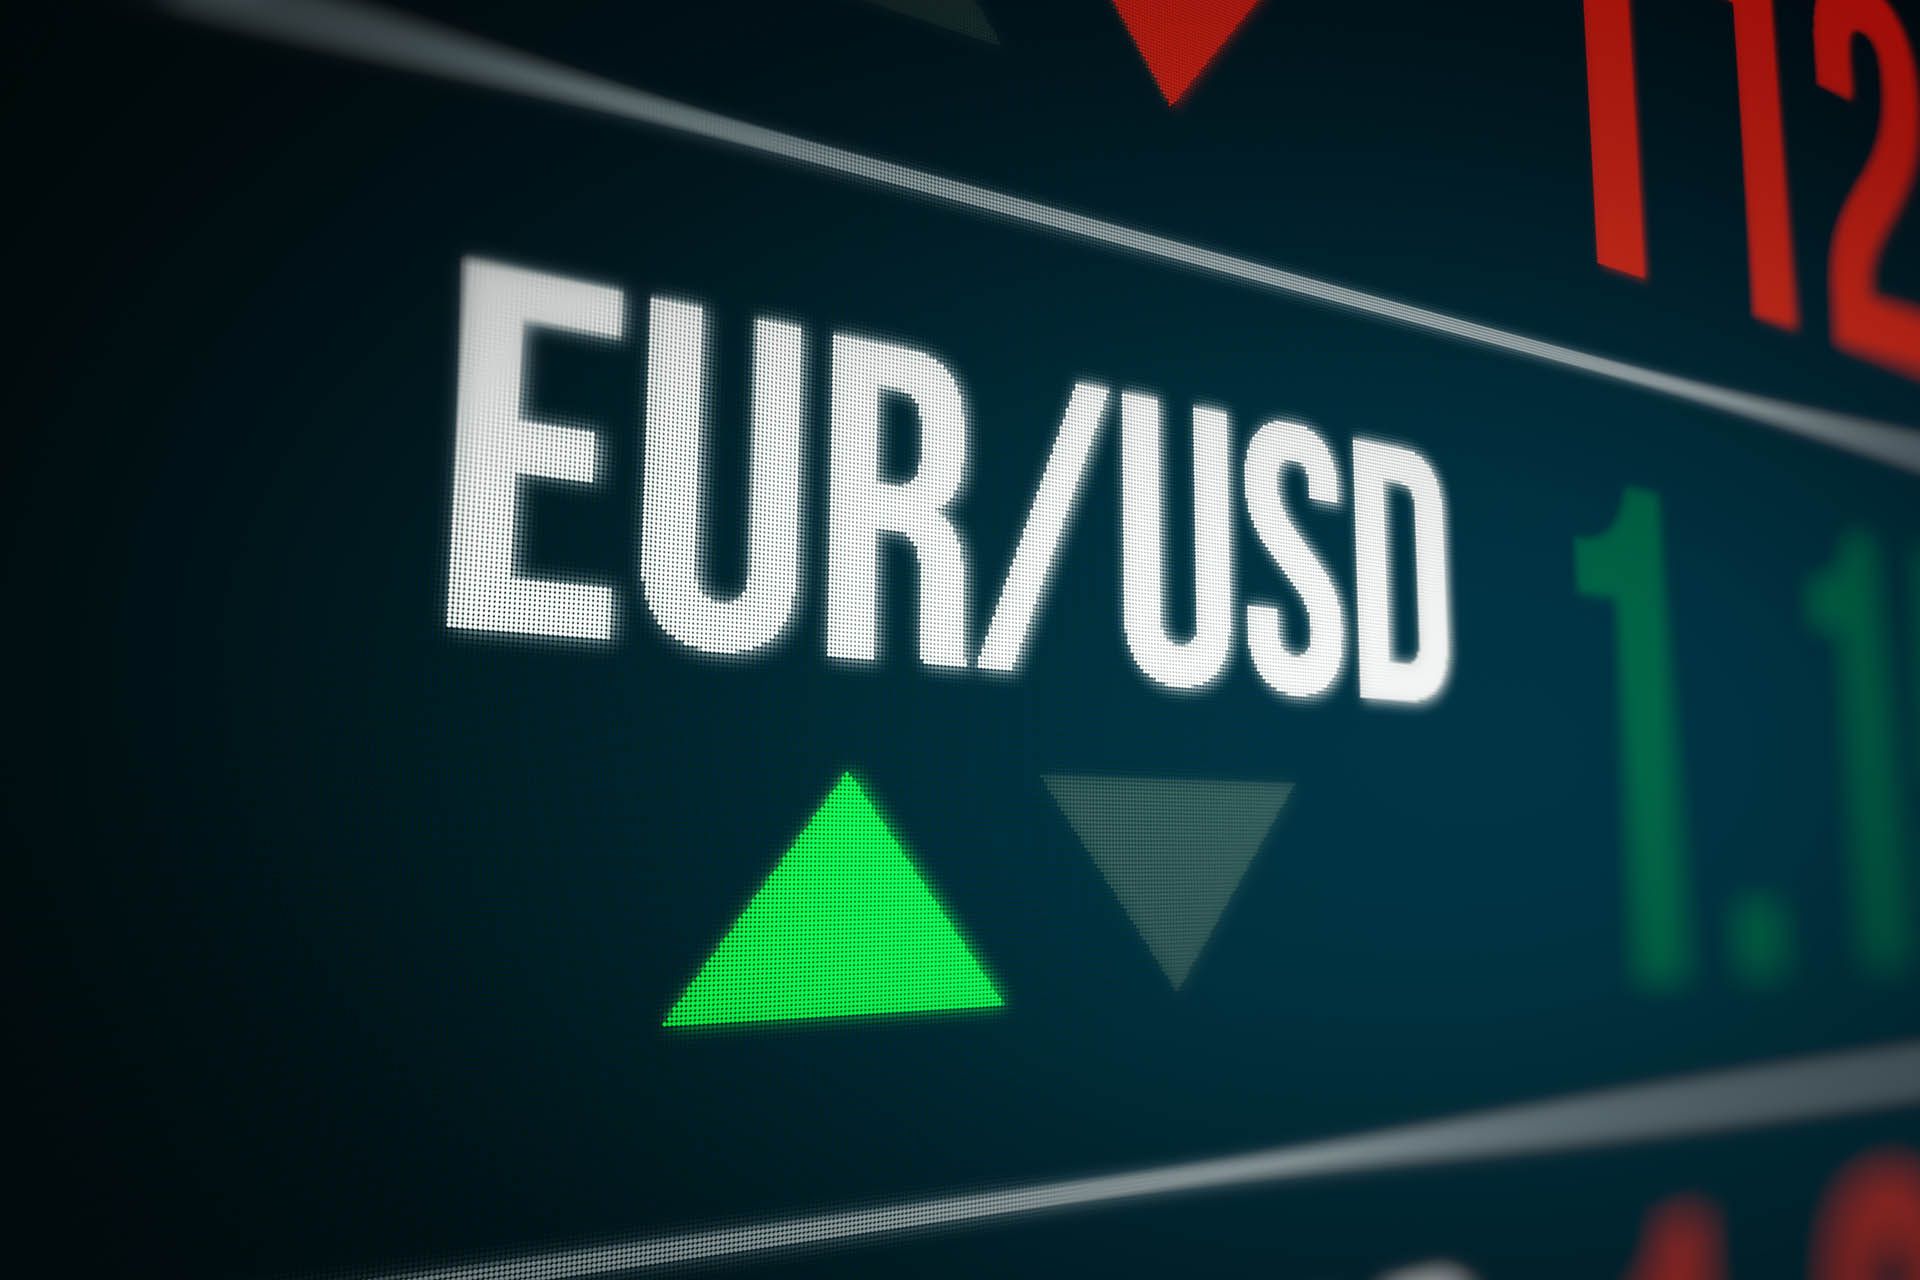 EUR to USD outlook